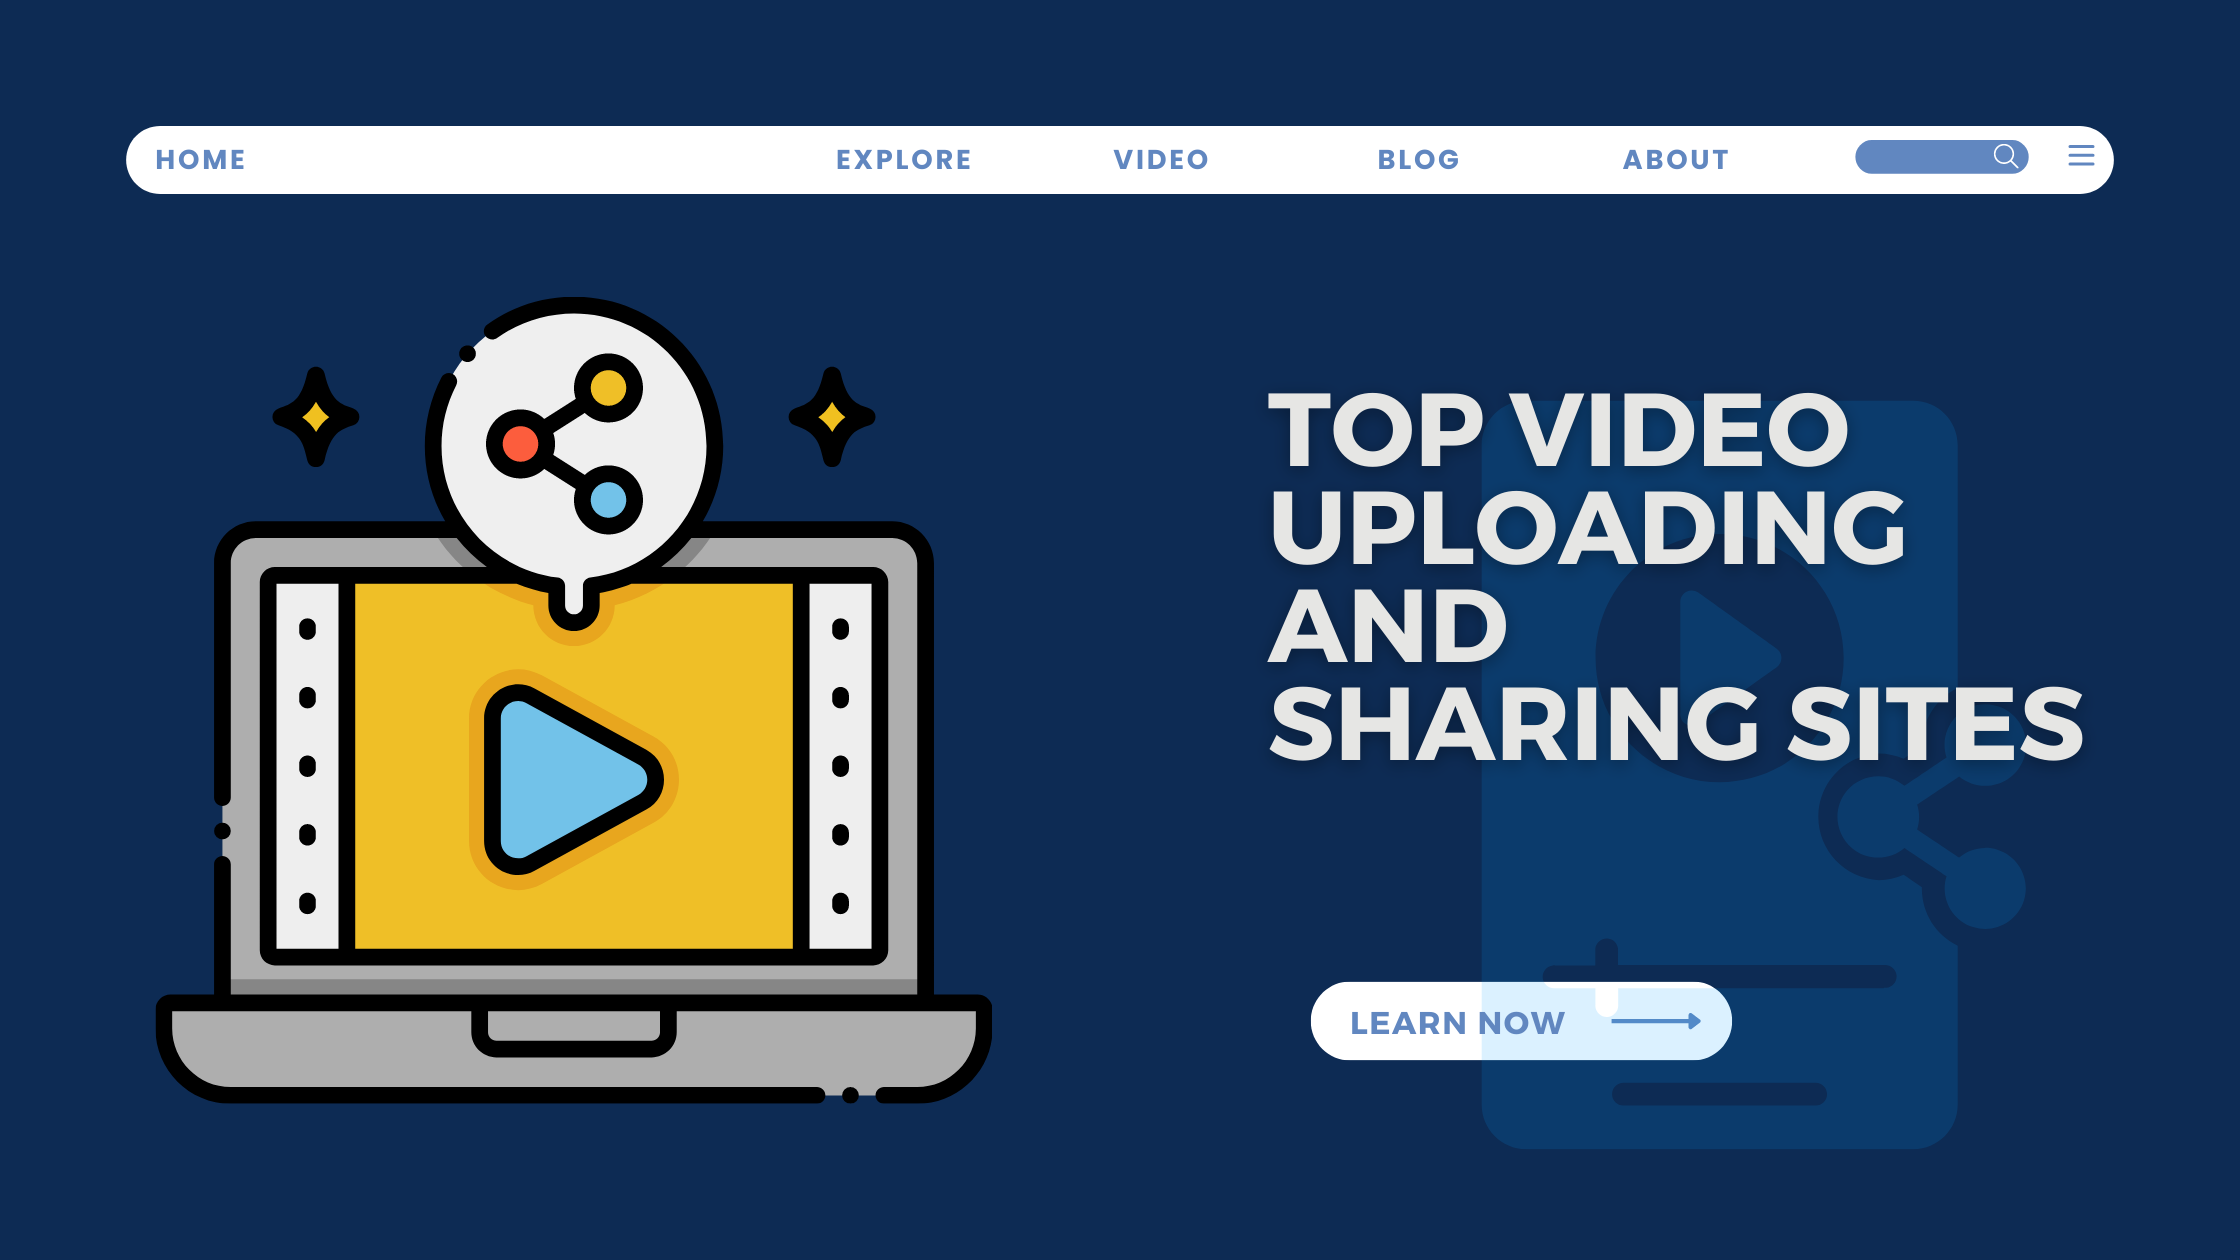 Top Video Uploading and Sharing Sites